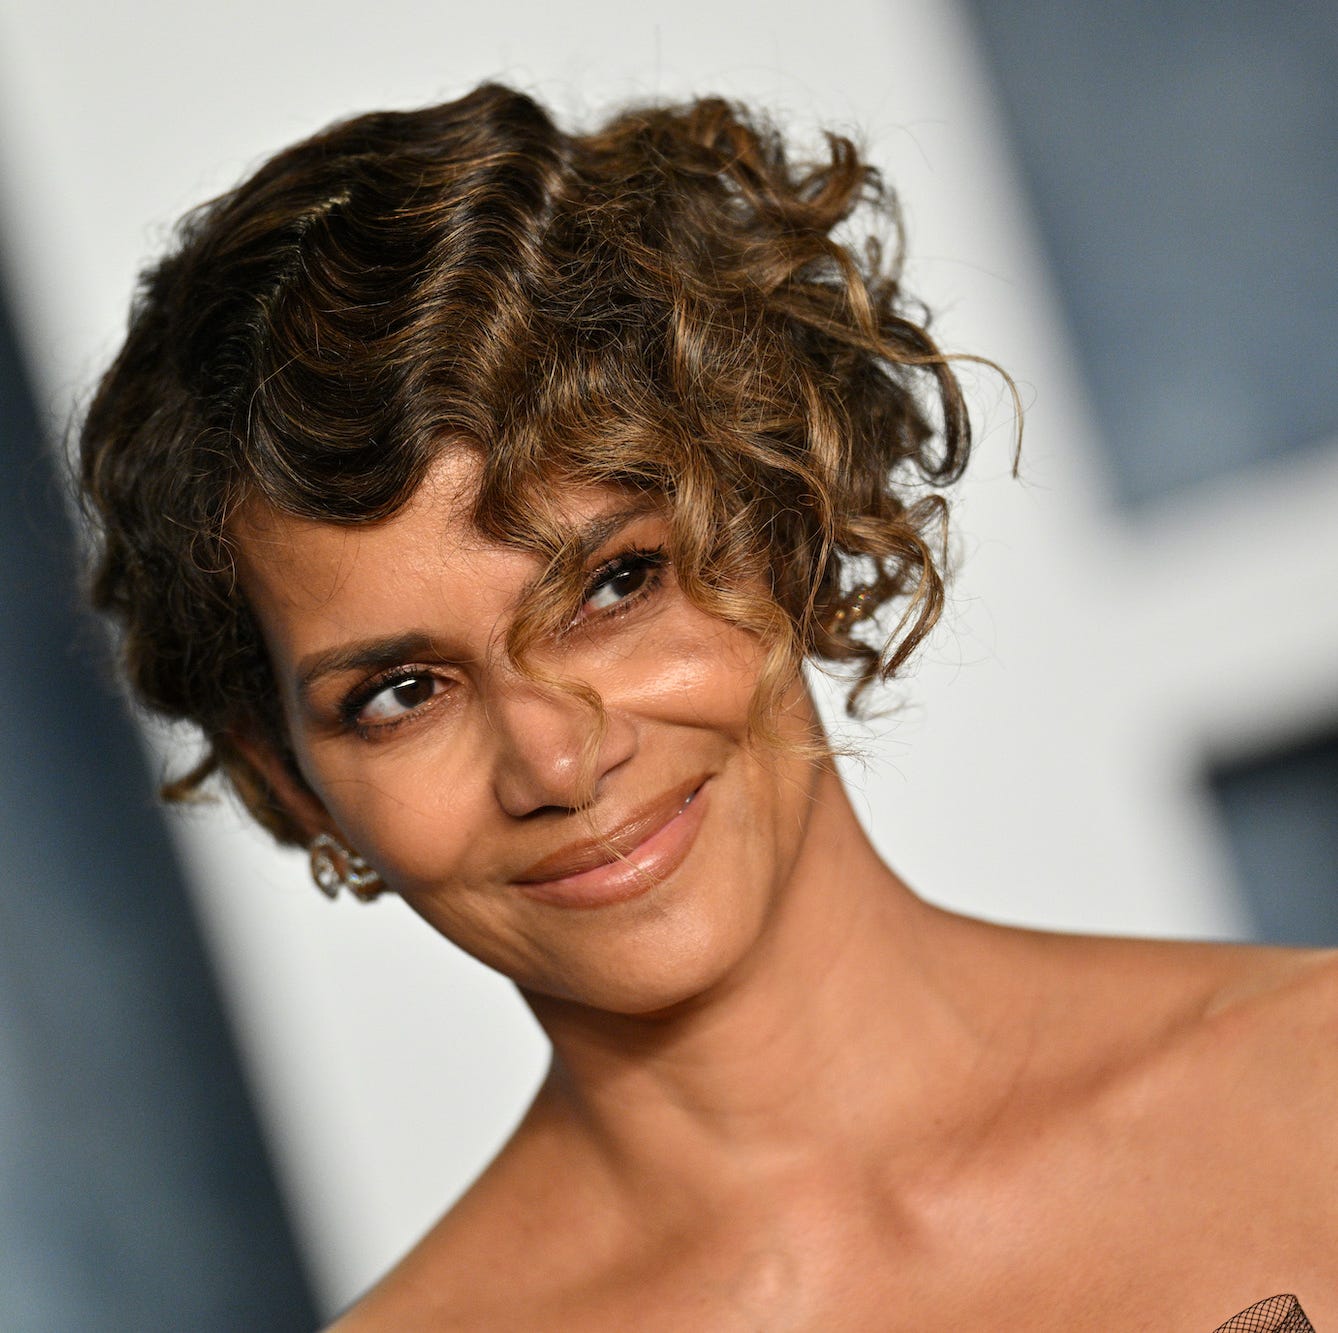 carl golding recommends halle berry titties pic